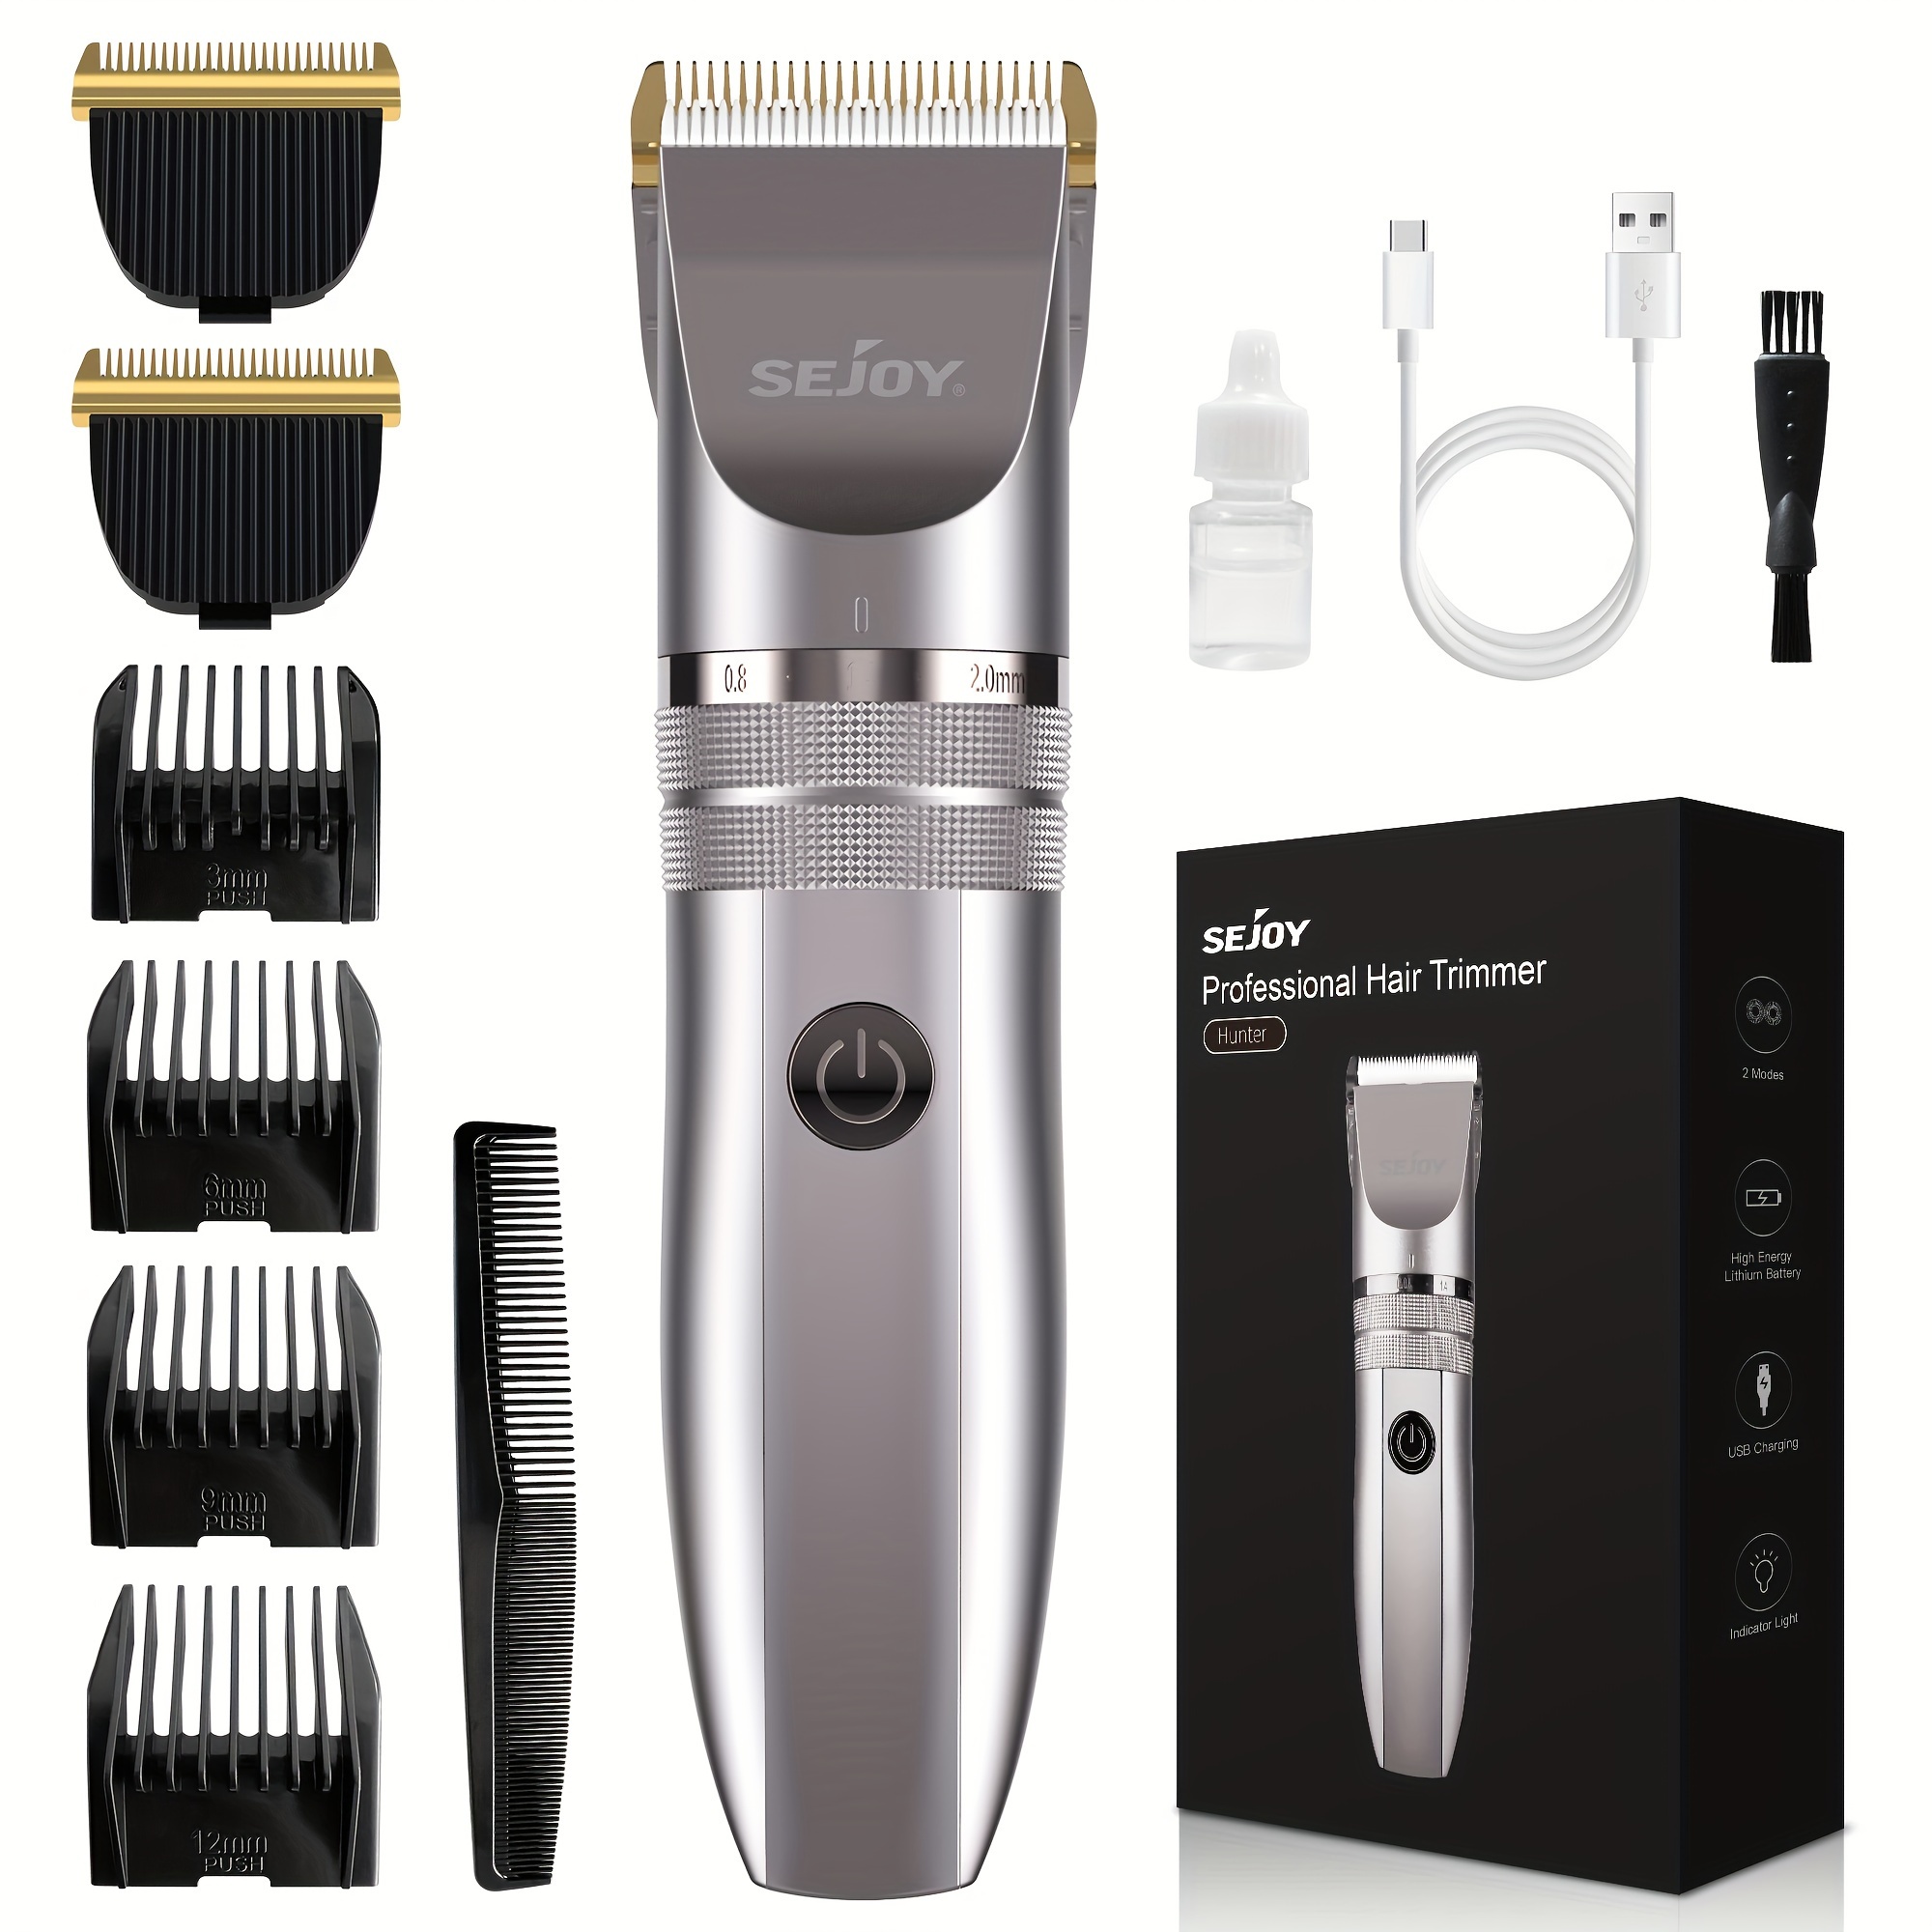 

Hair Clippers For Men Professional -multi Groomer All-in-one Trimmer Series, Cordless Barber Clippers For Hair Cutting & Grooming, Rechargeable Beard Trimmer